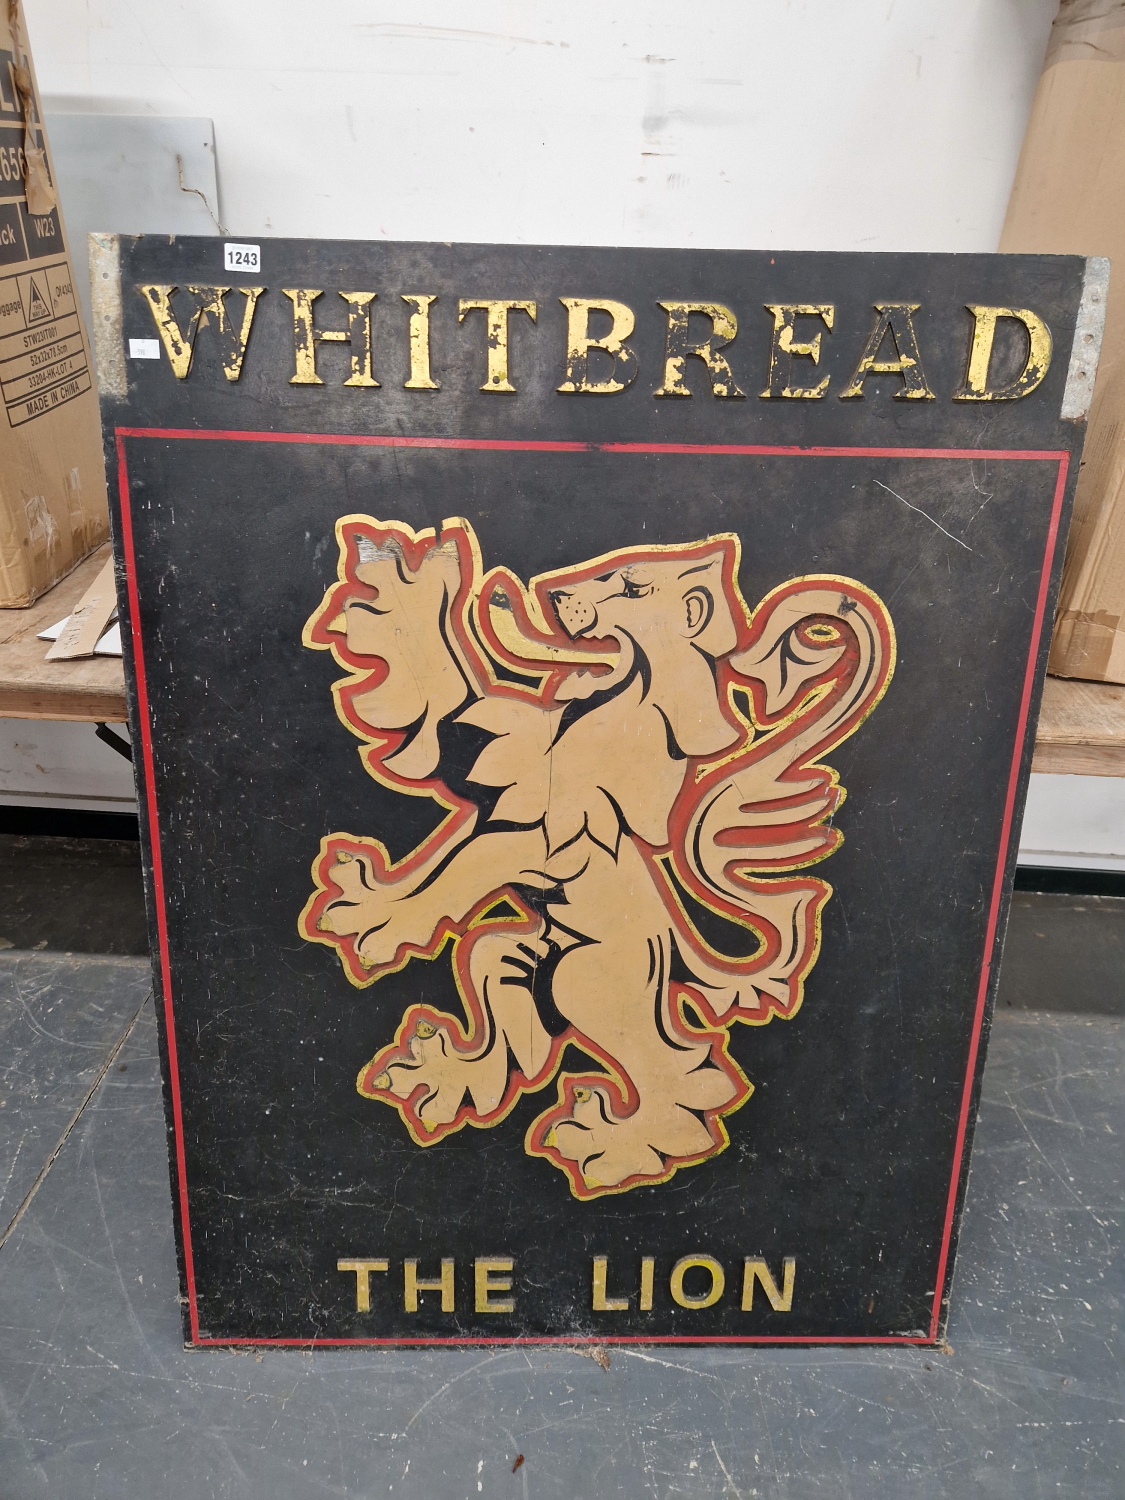 A VINTAGE PUB SIGN "THE LION" WHITBRED BREWERY. - Image 2 of 3